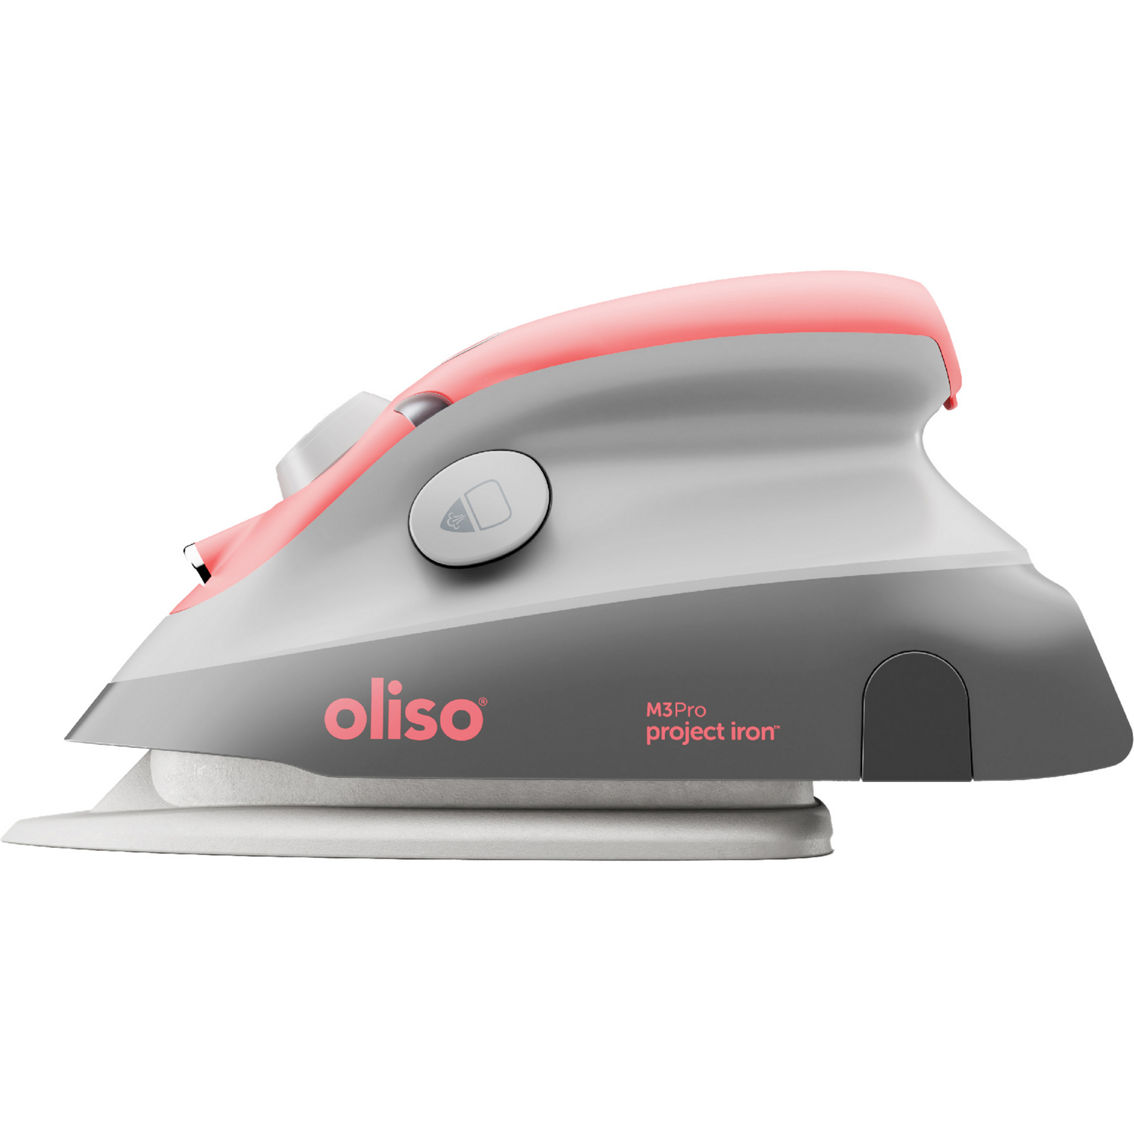 Oliso M3Pro Project Iron with Silicone Trivet - Image 3 of 10